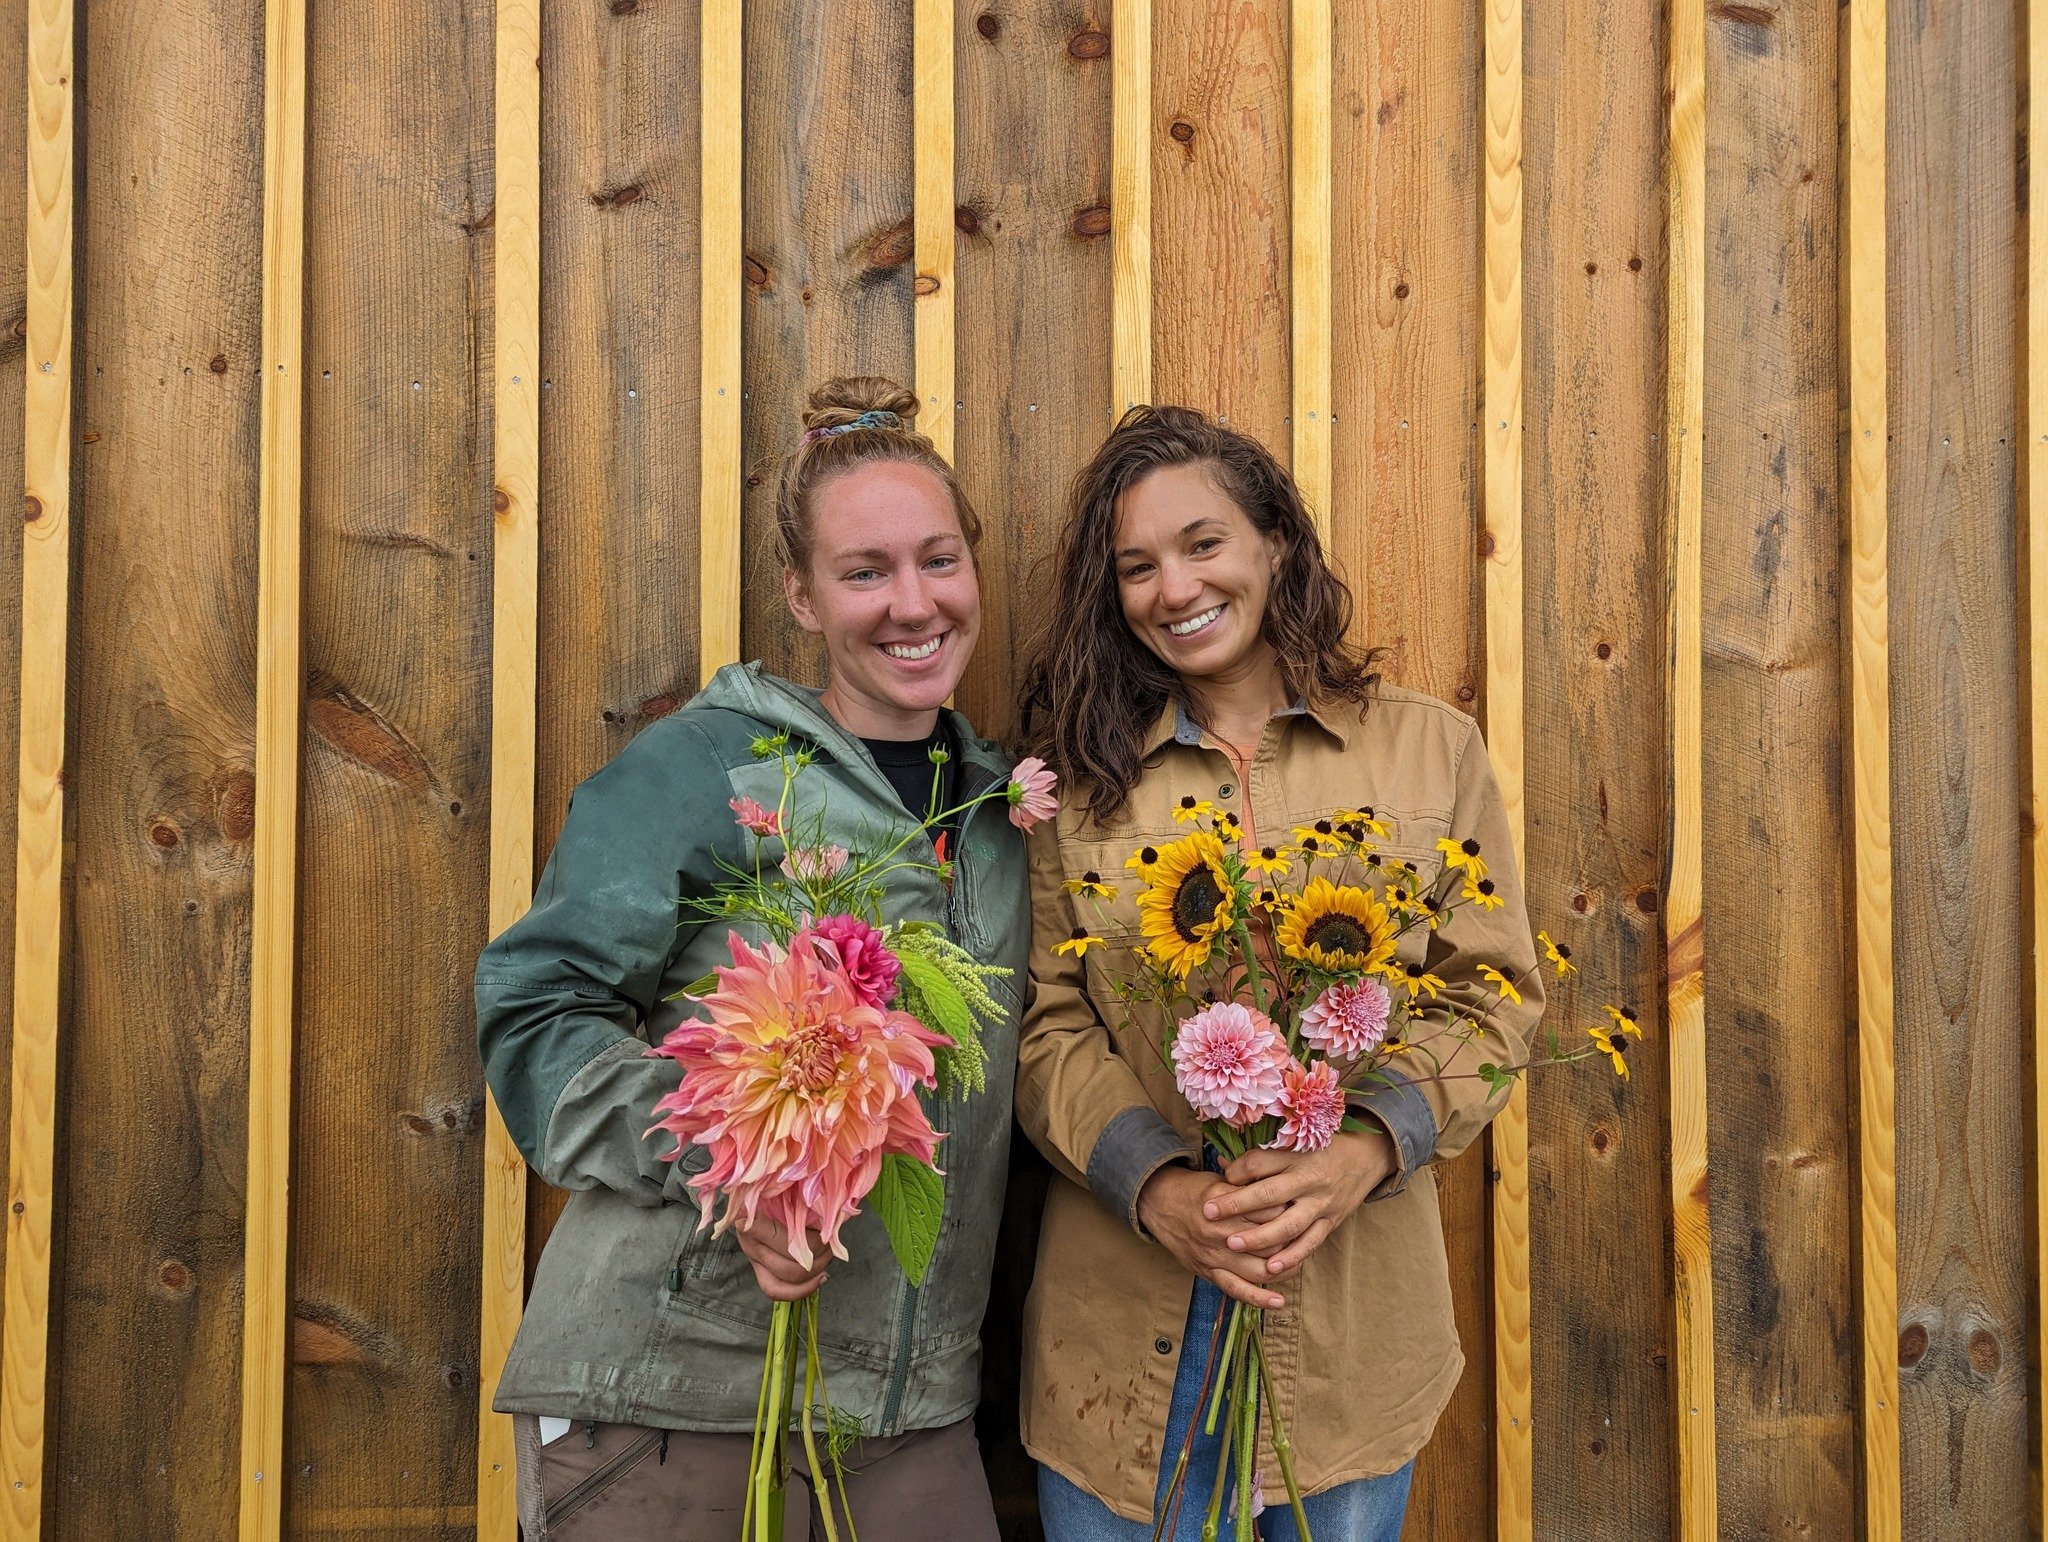 We're coming back to farmers markets this Saturday Come visit Savannah at the Ann Arbor Kerrytown Market and Miranda at the Farmington Farmers Market! 

We'll have an assortment of tasty spring produce, a great selection of transplants for your garde